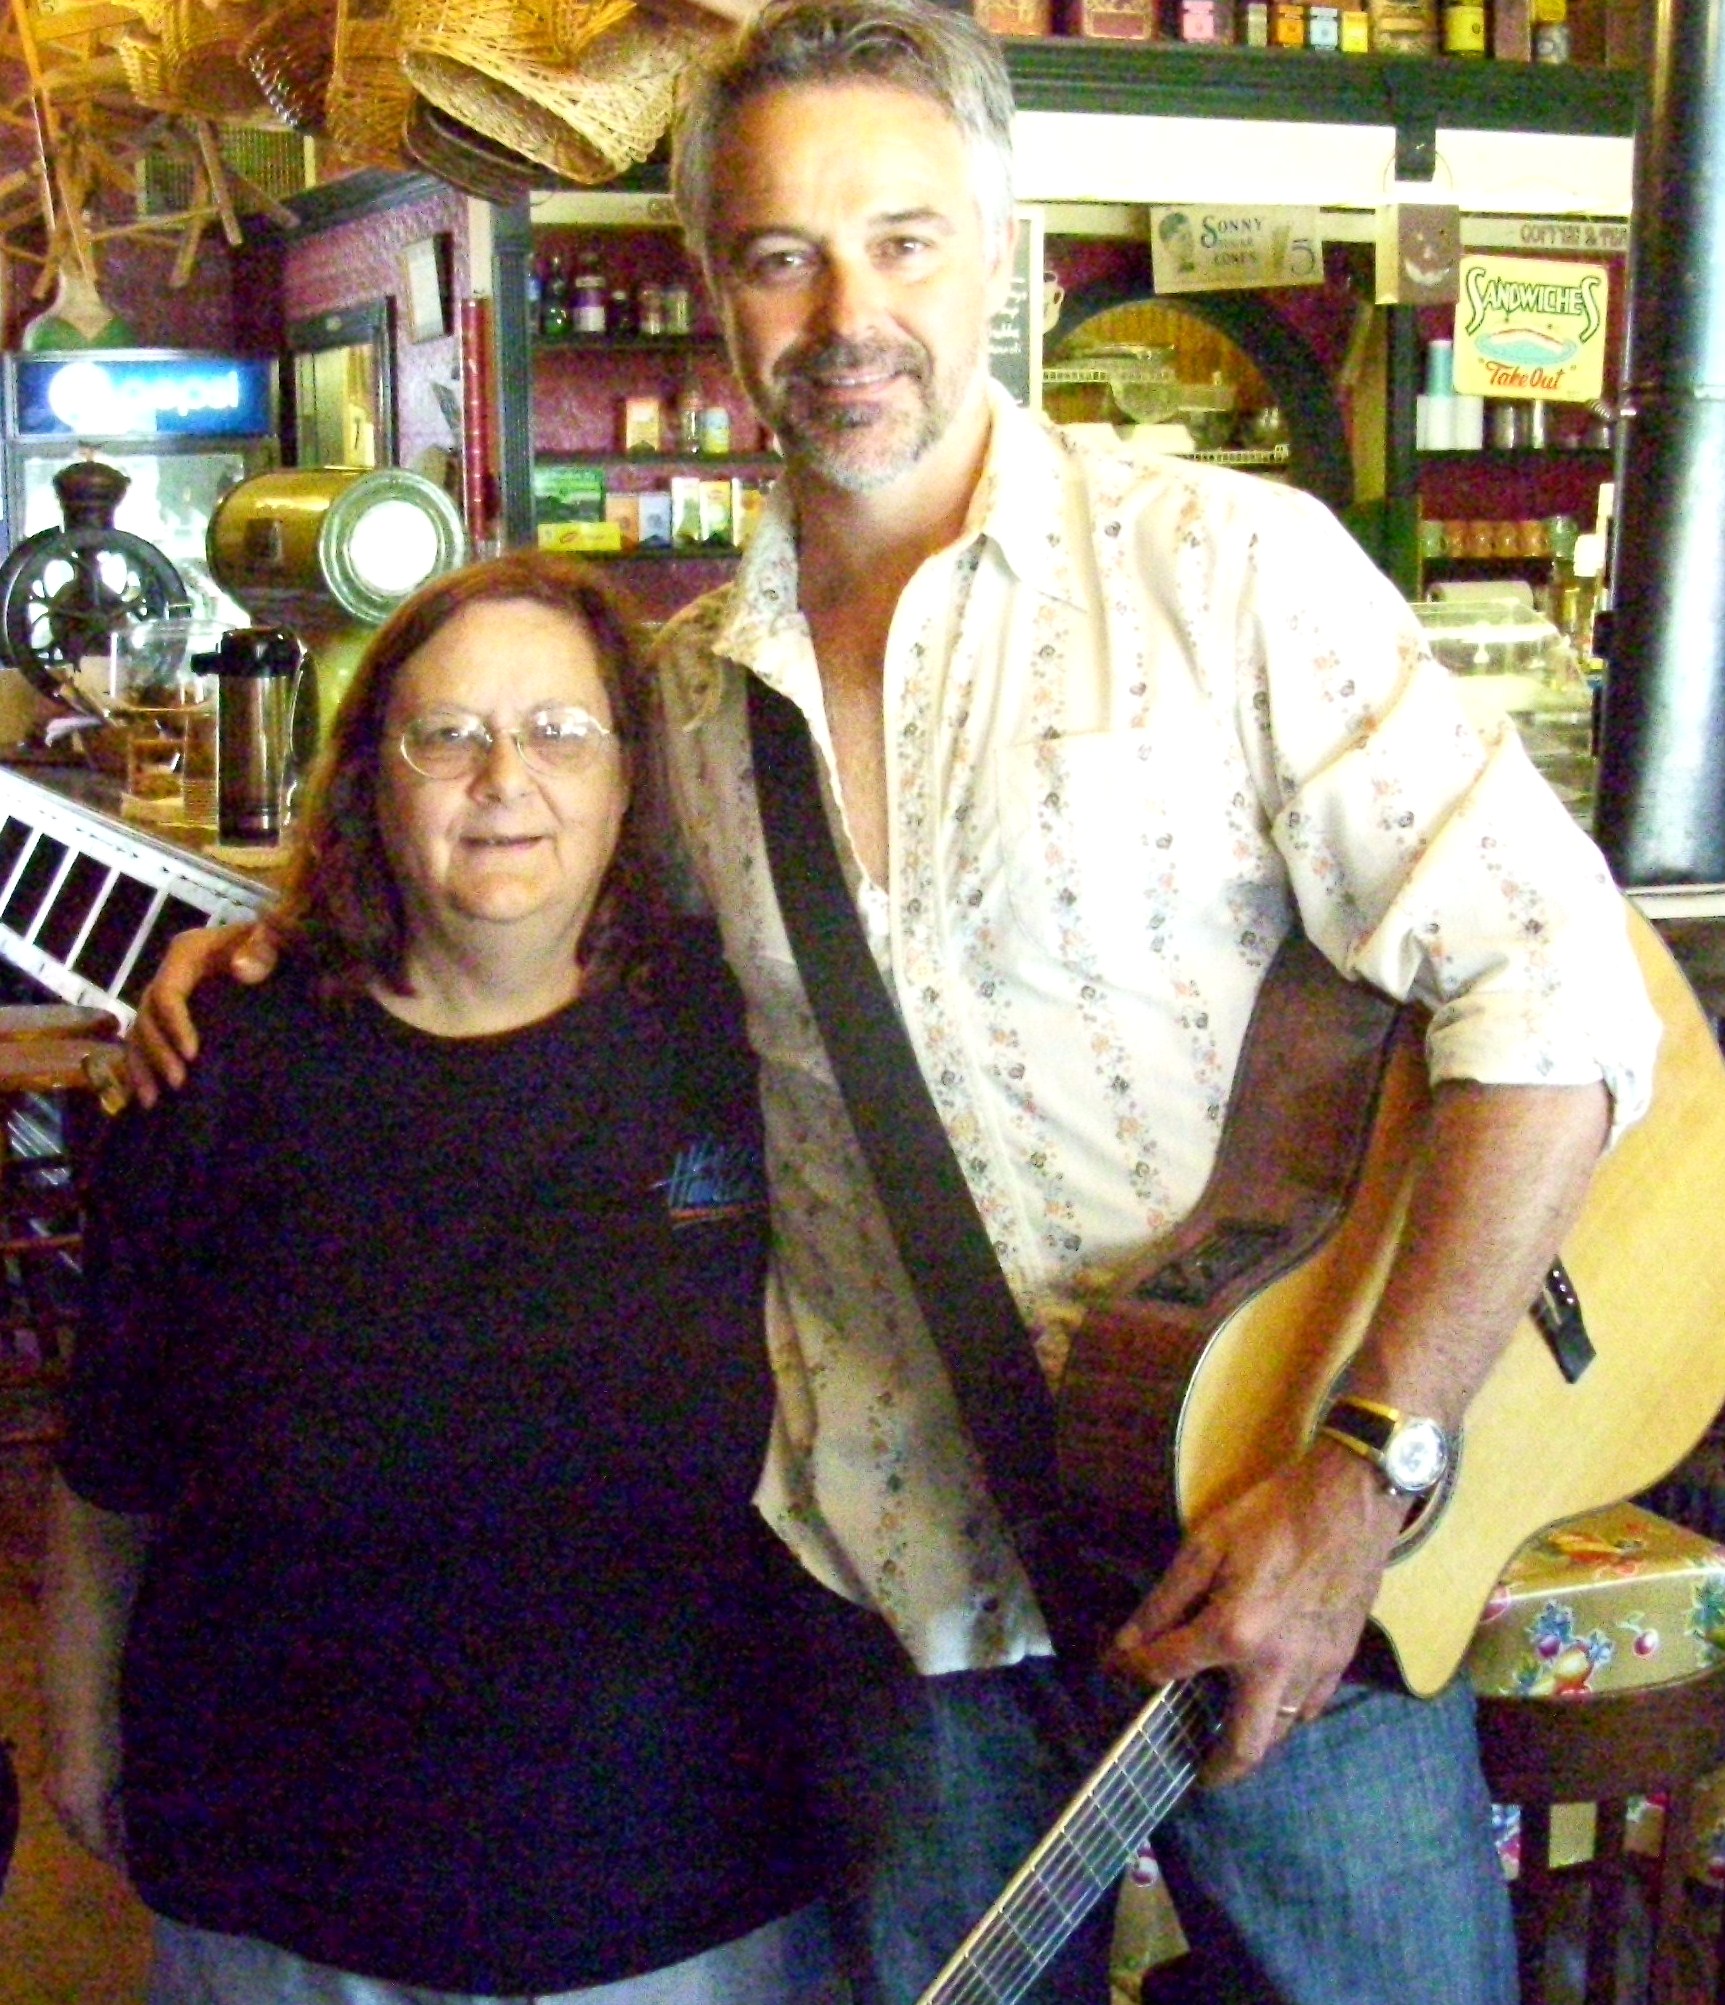 With Cameron Daddo, recording session for Ten Songs ...and Change, and charity concert for The Tug McGraw Foundation. (producers, Cameron Daddo, Cheryl Whitman-Dubuque, John DeCarli)